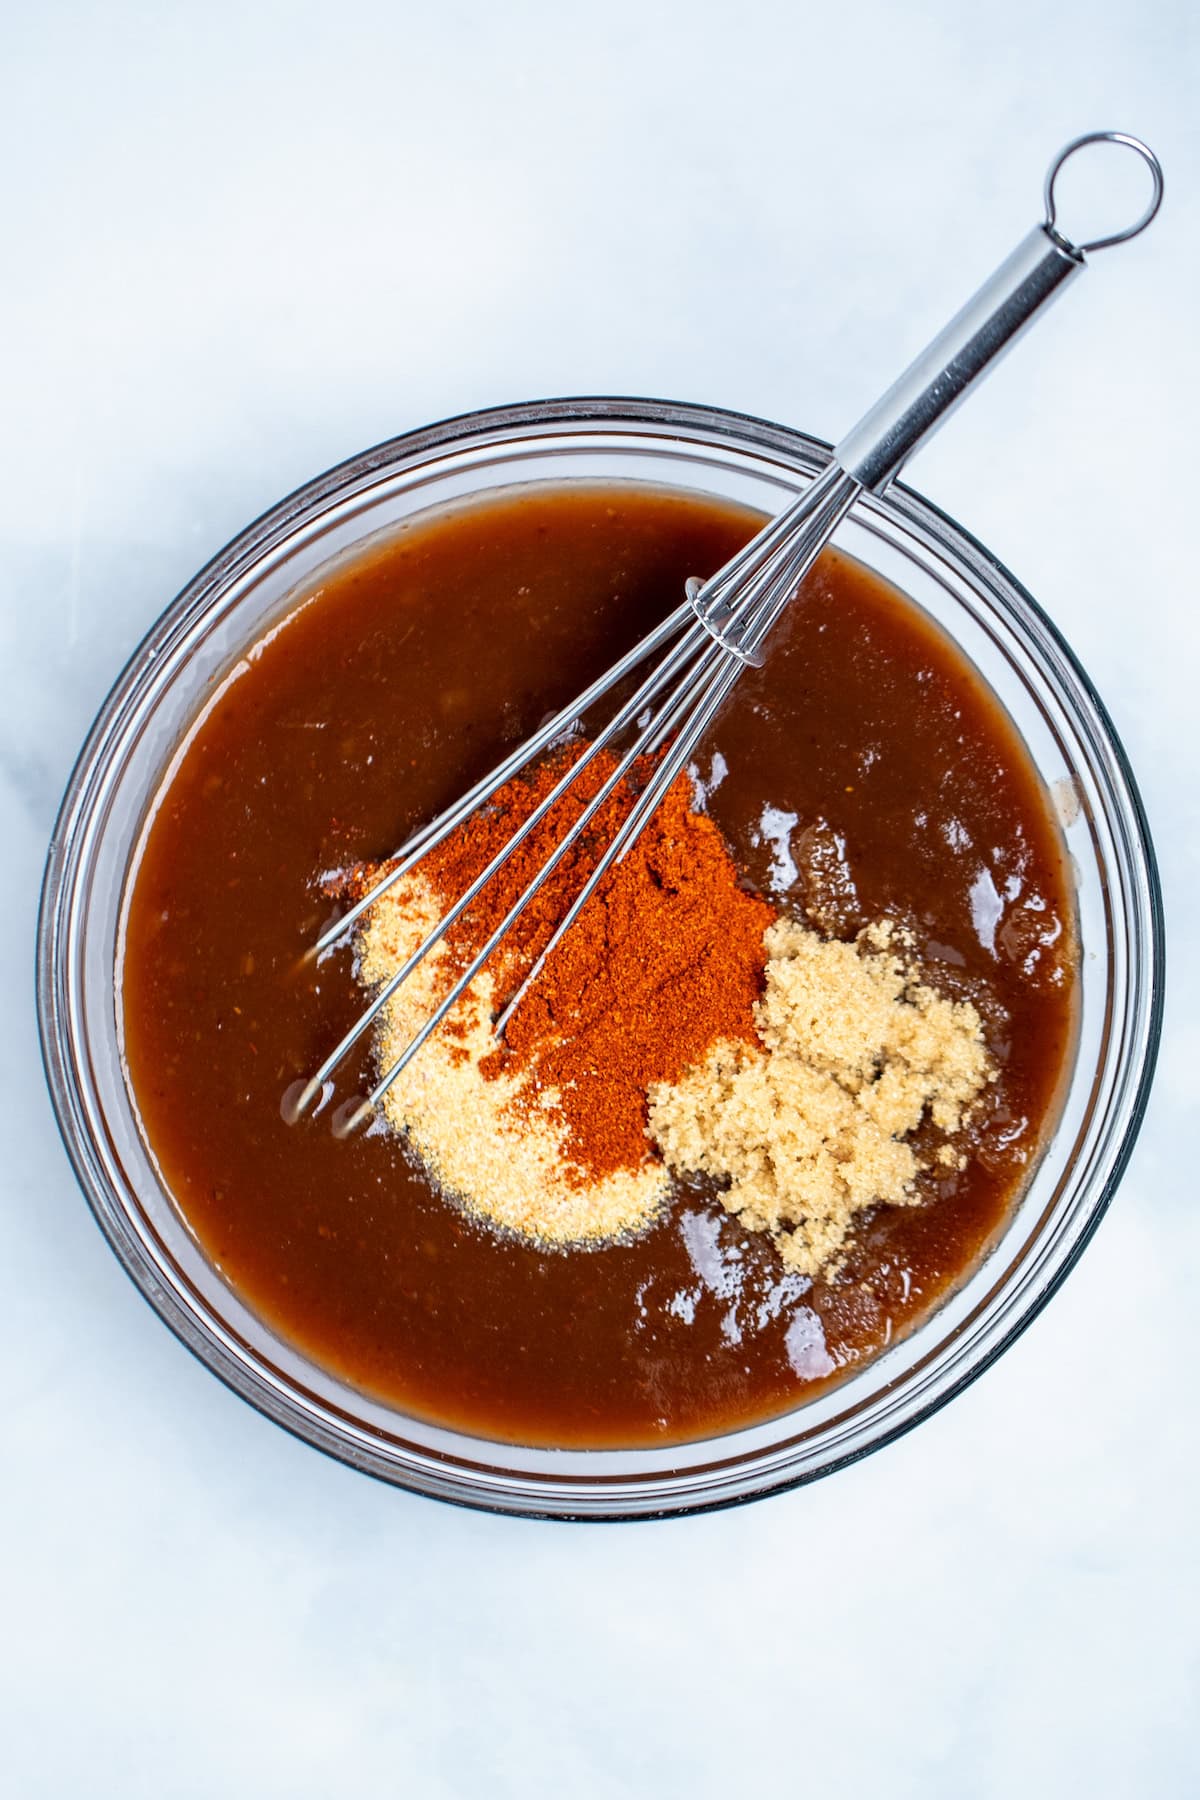 A glass bowl on a table with BBQ sauce, spices, and brown sugar waiting to be mixed together with a whisk.